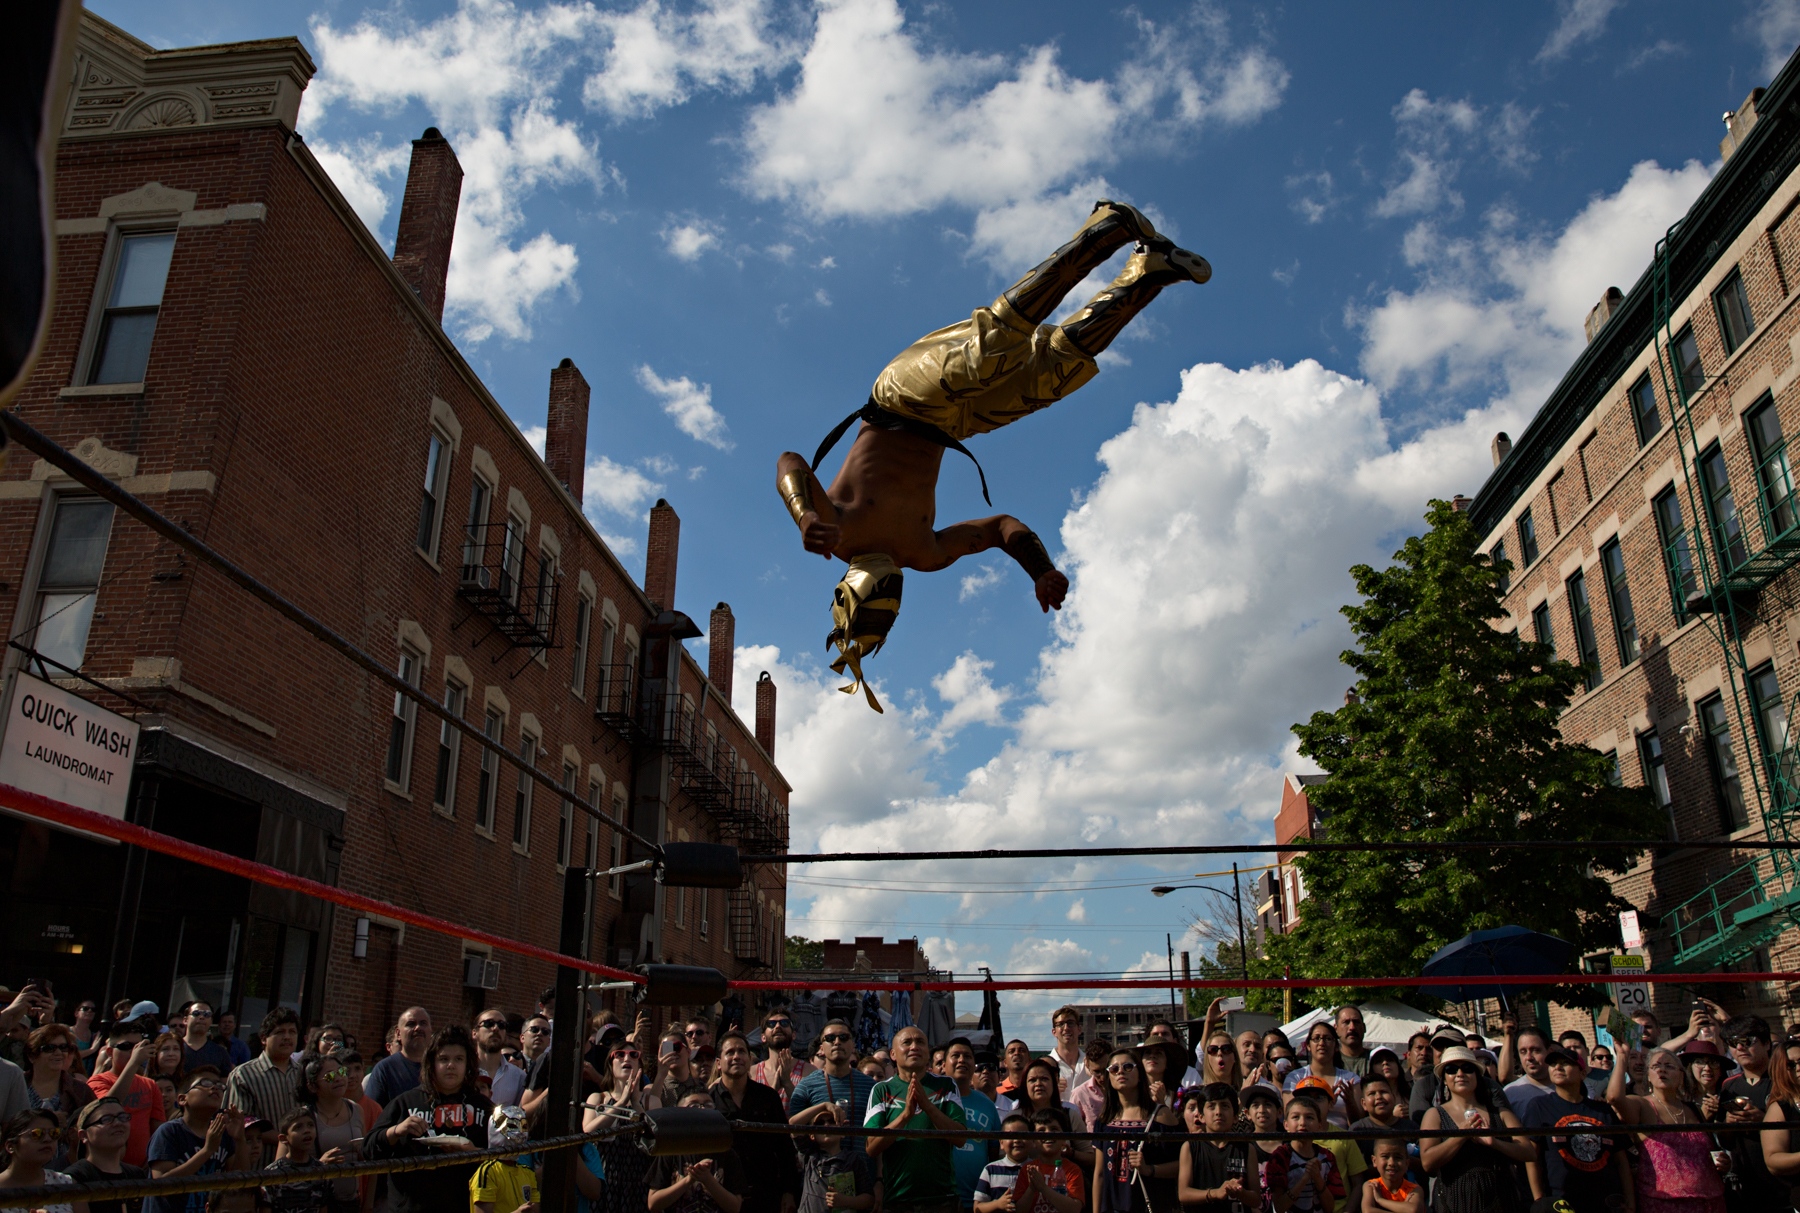  During the Mole de Mayo, a yearly mole sauce competition in the Pilsen neighborhood in Chicago, a luchador demonstrates his high flying aerial...